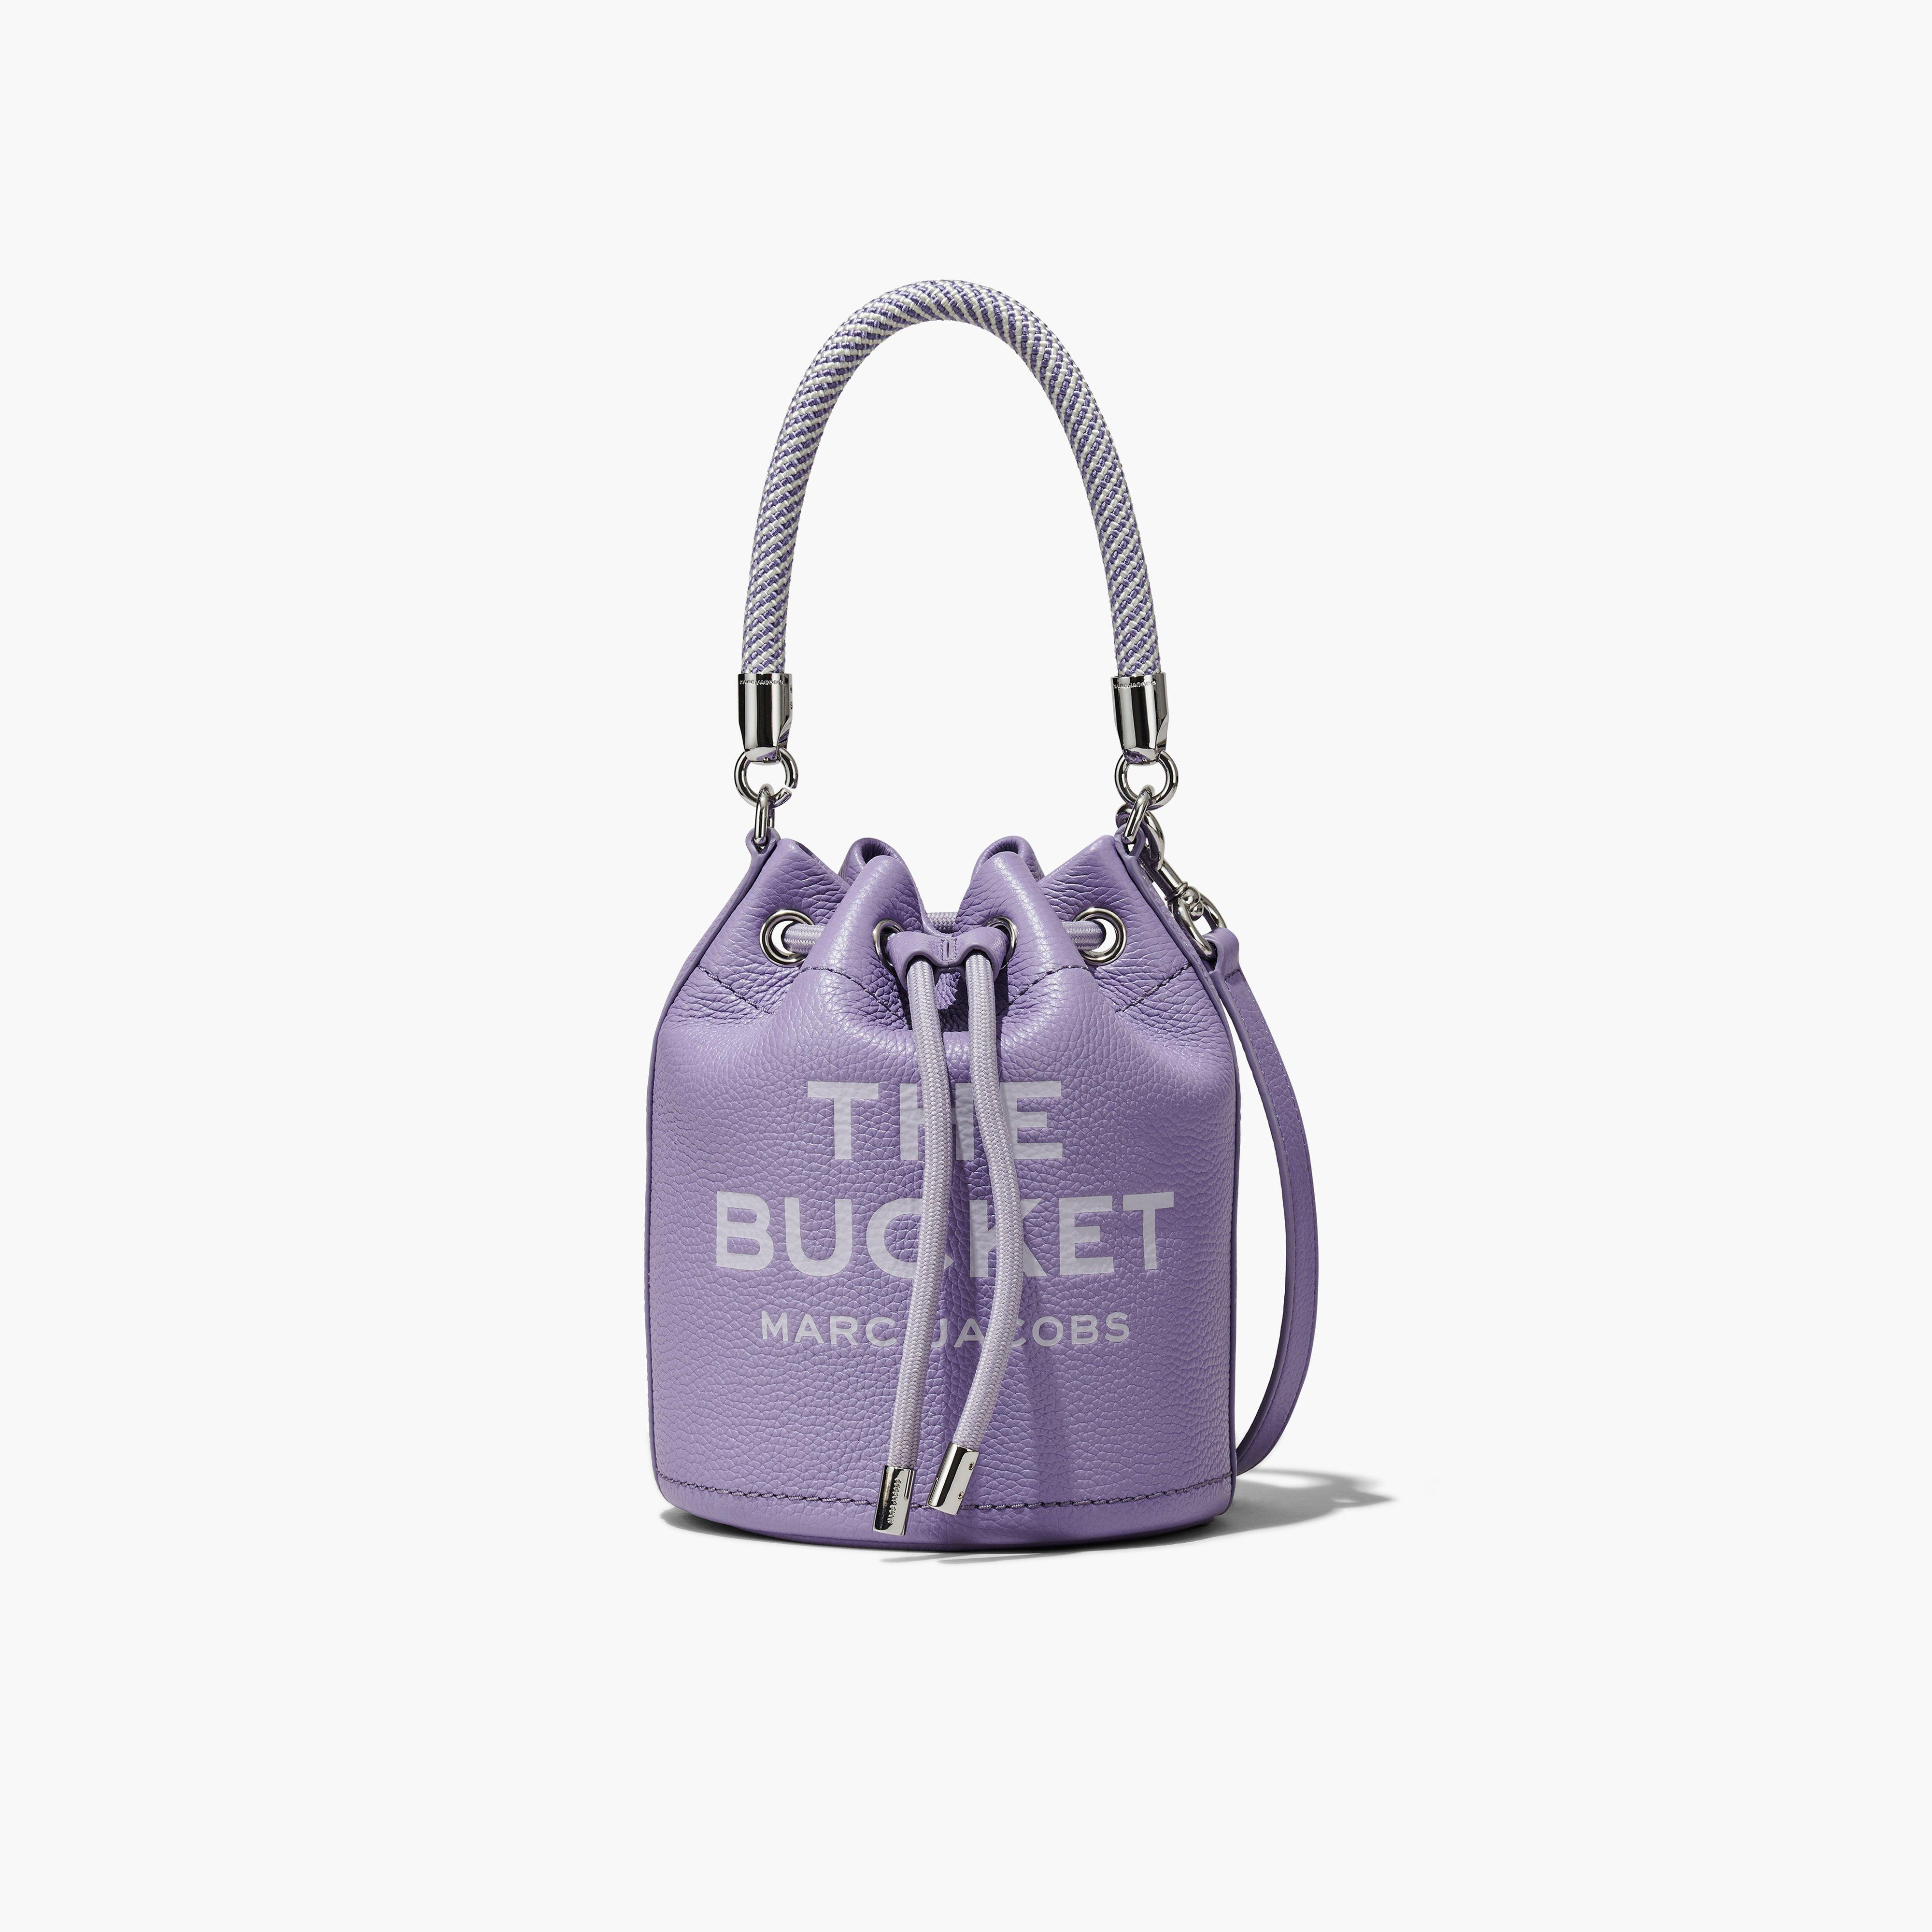 Marc by Marc jacobs The Leather Bucket Bag,DAYBREAK